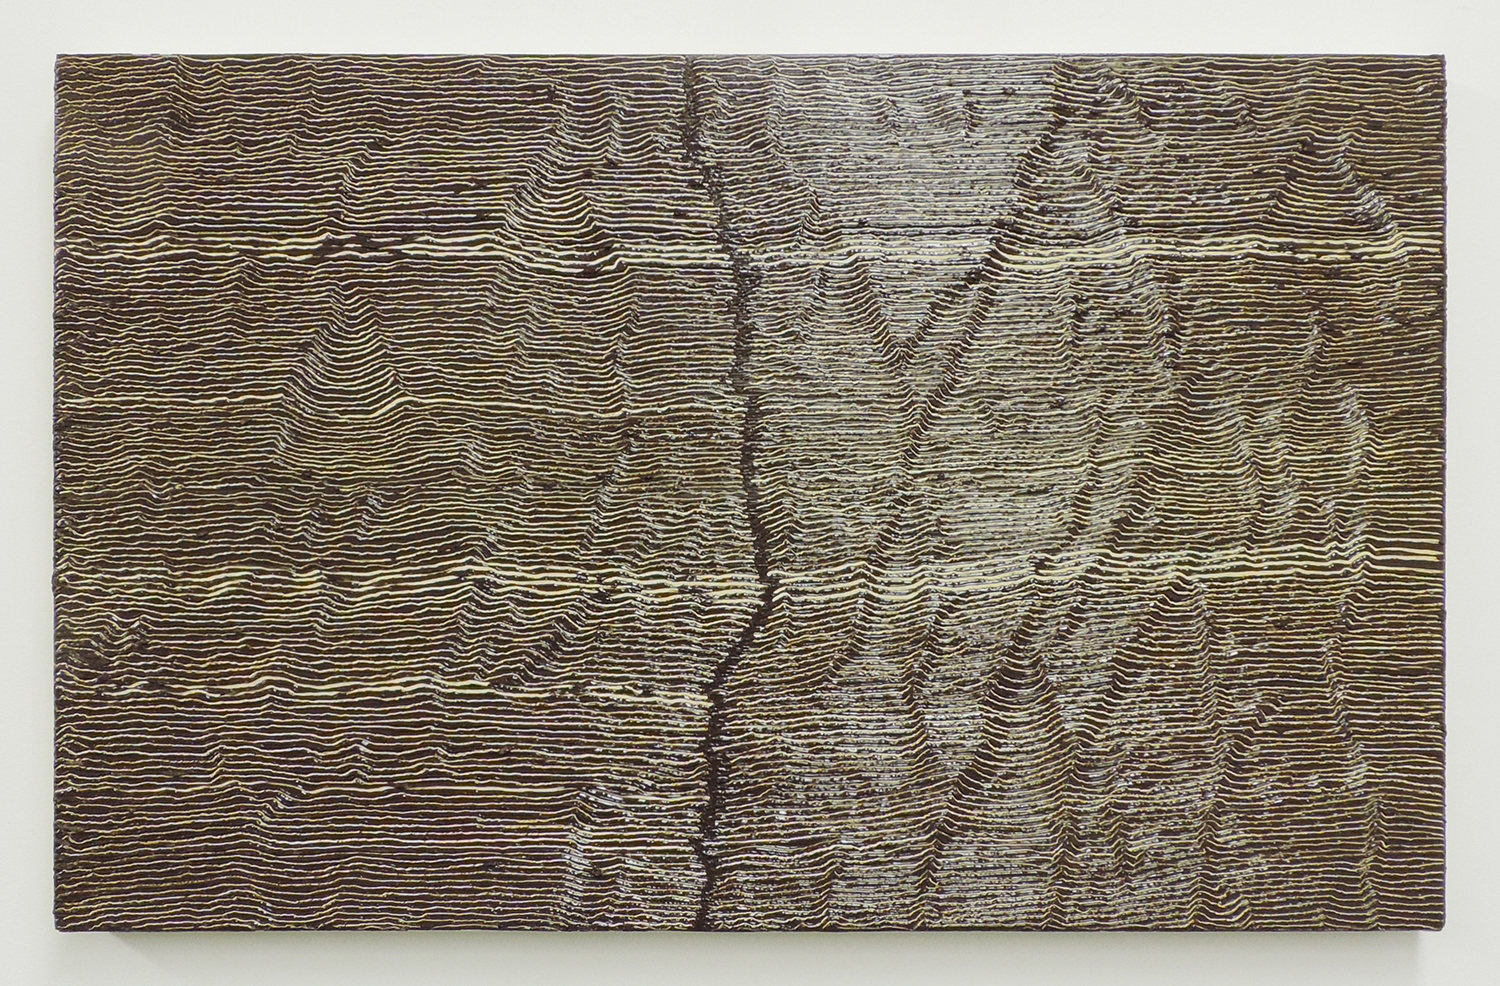 Fissure 8<br>Oil and Amber on canvas over panel｜33.7 x 53.4 cm, 2001